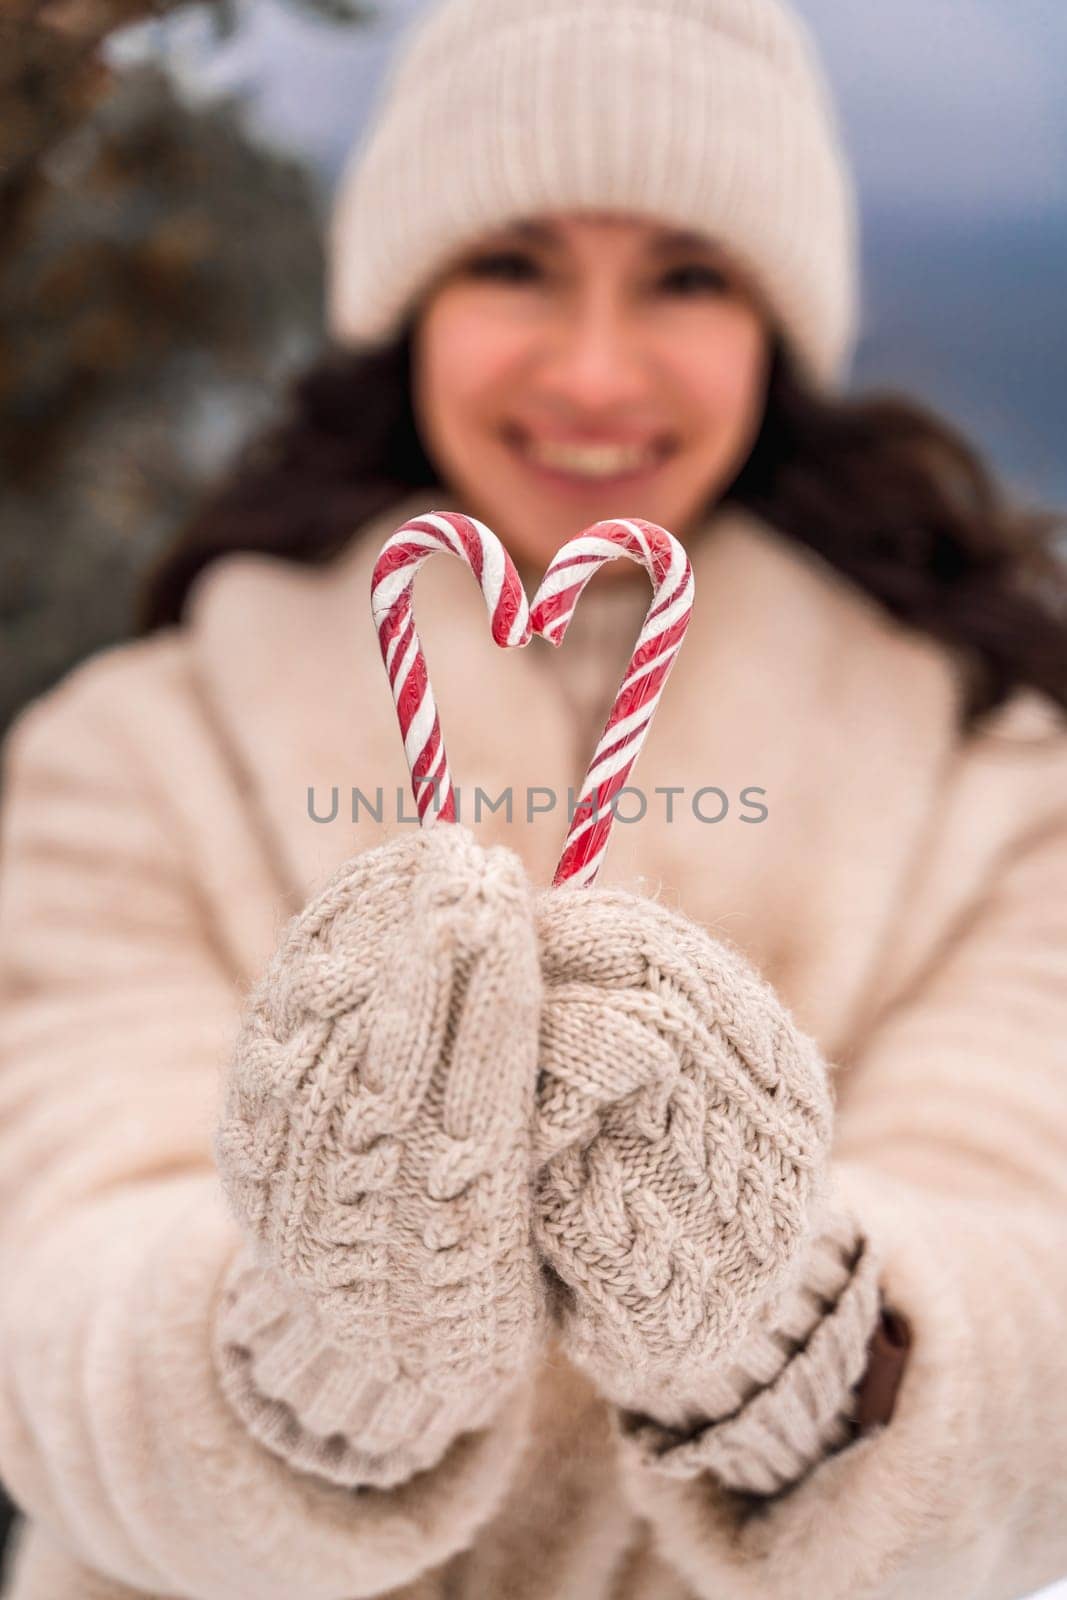 Woman candy sea. Smiling woman in knitted hat, mittens and beige coat holding lollipops candy canes in her hands in shape of heart against the backdrop of the sea